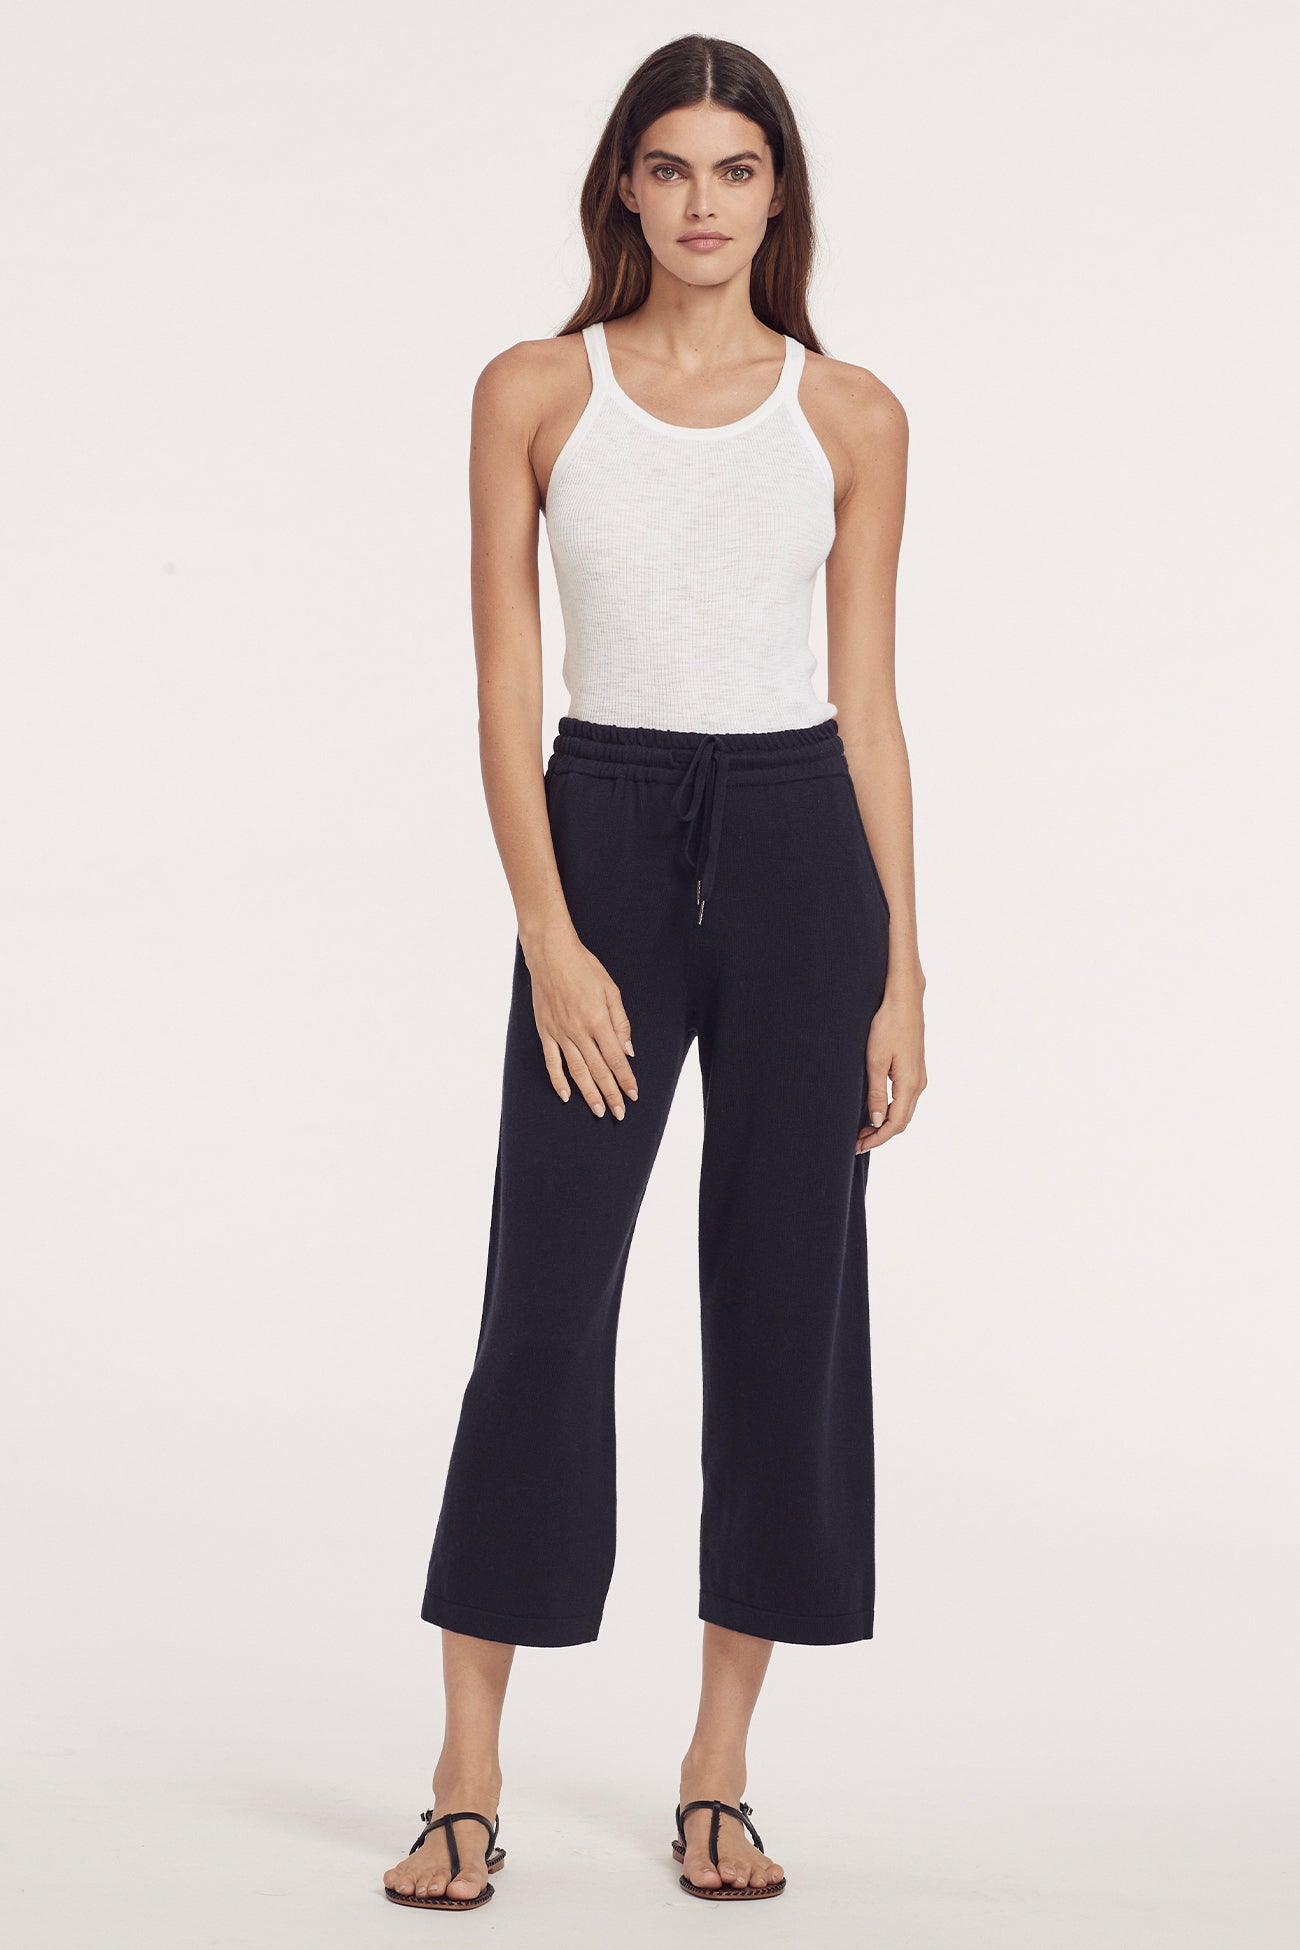 Sweat Pant Ankle Length